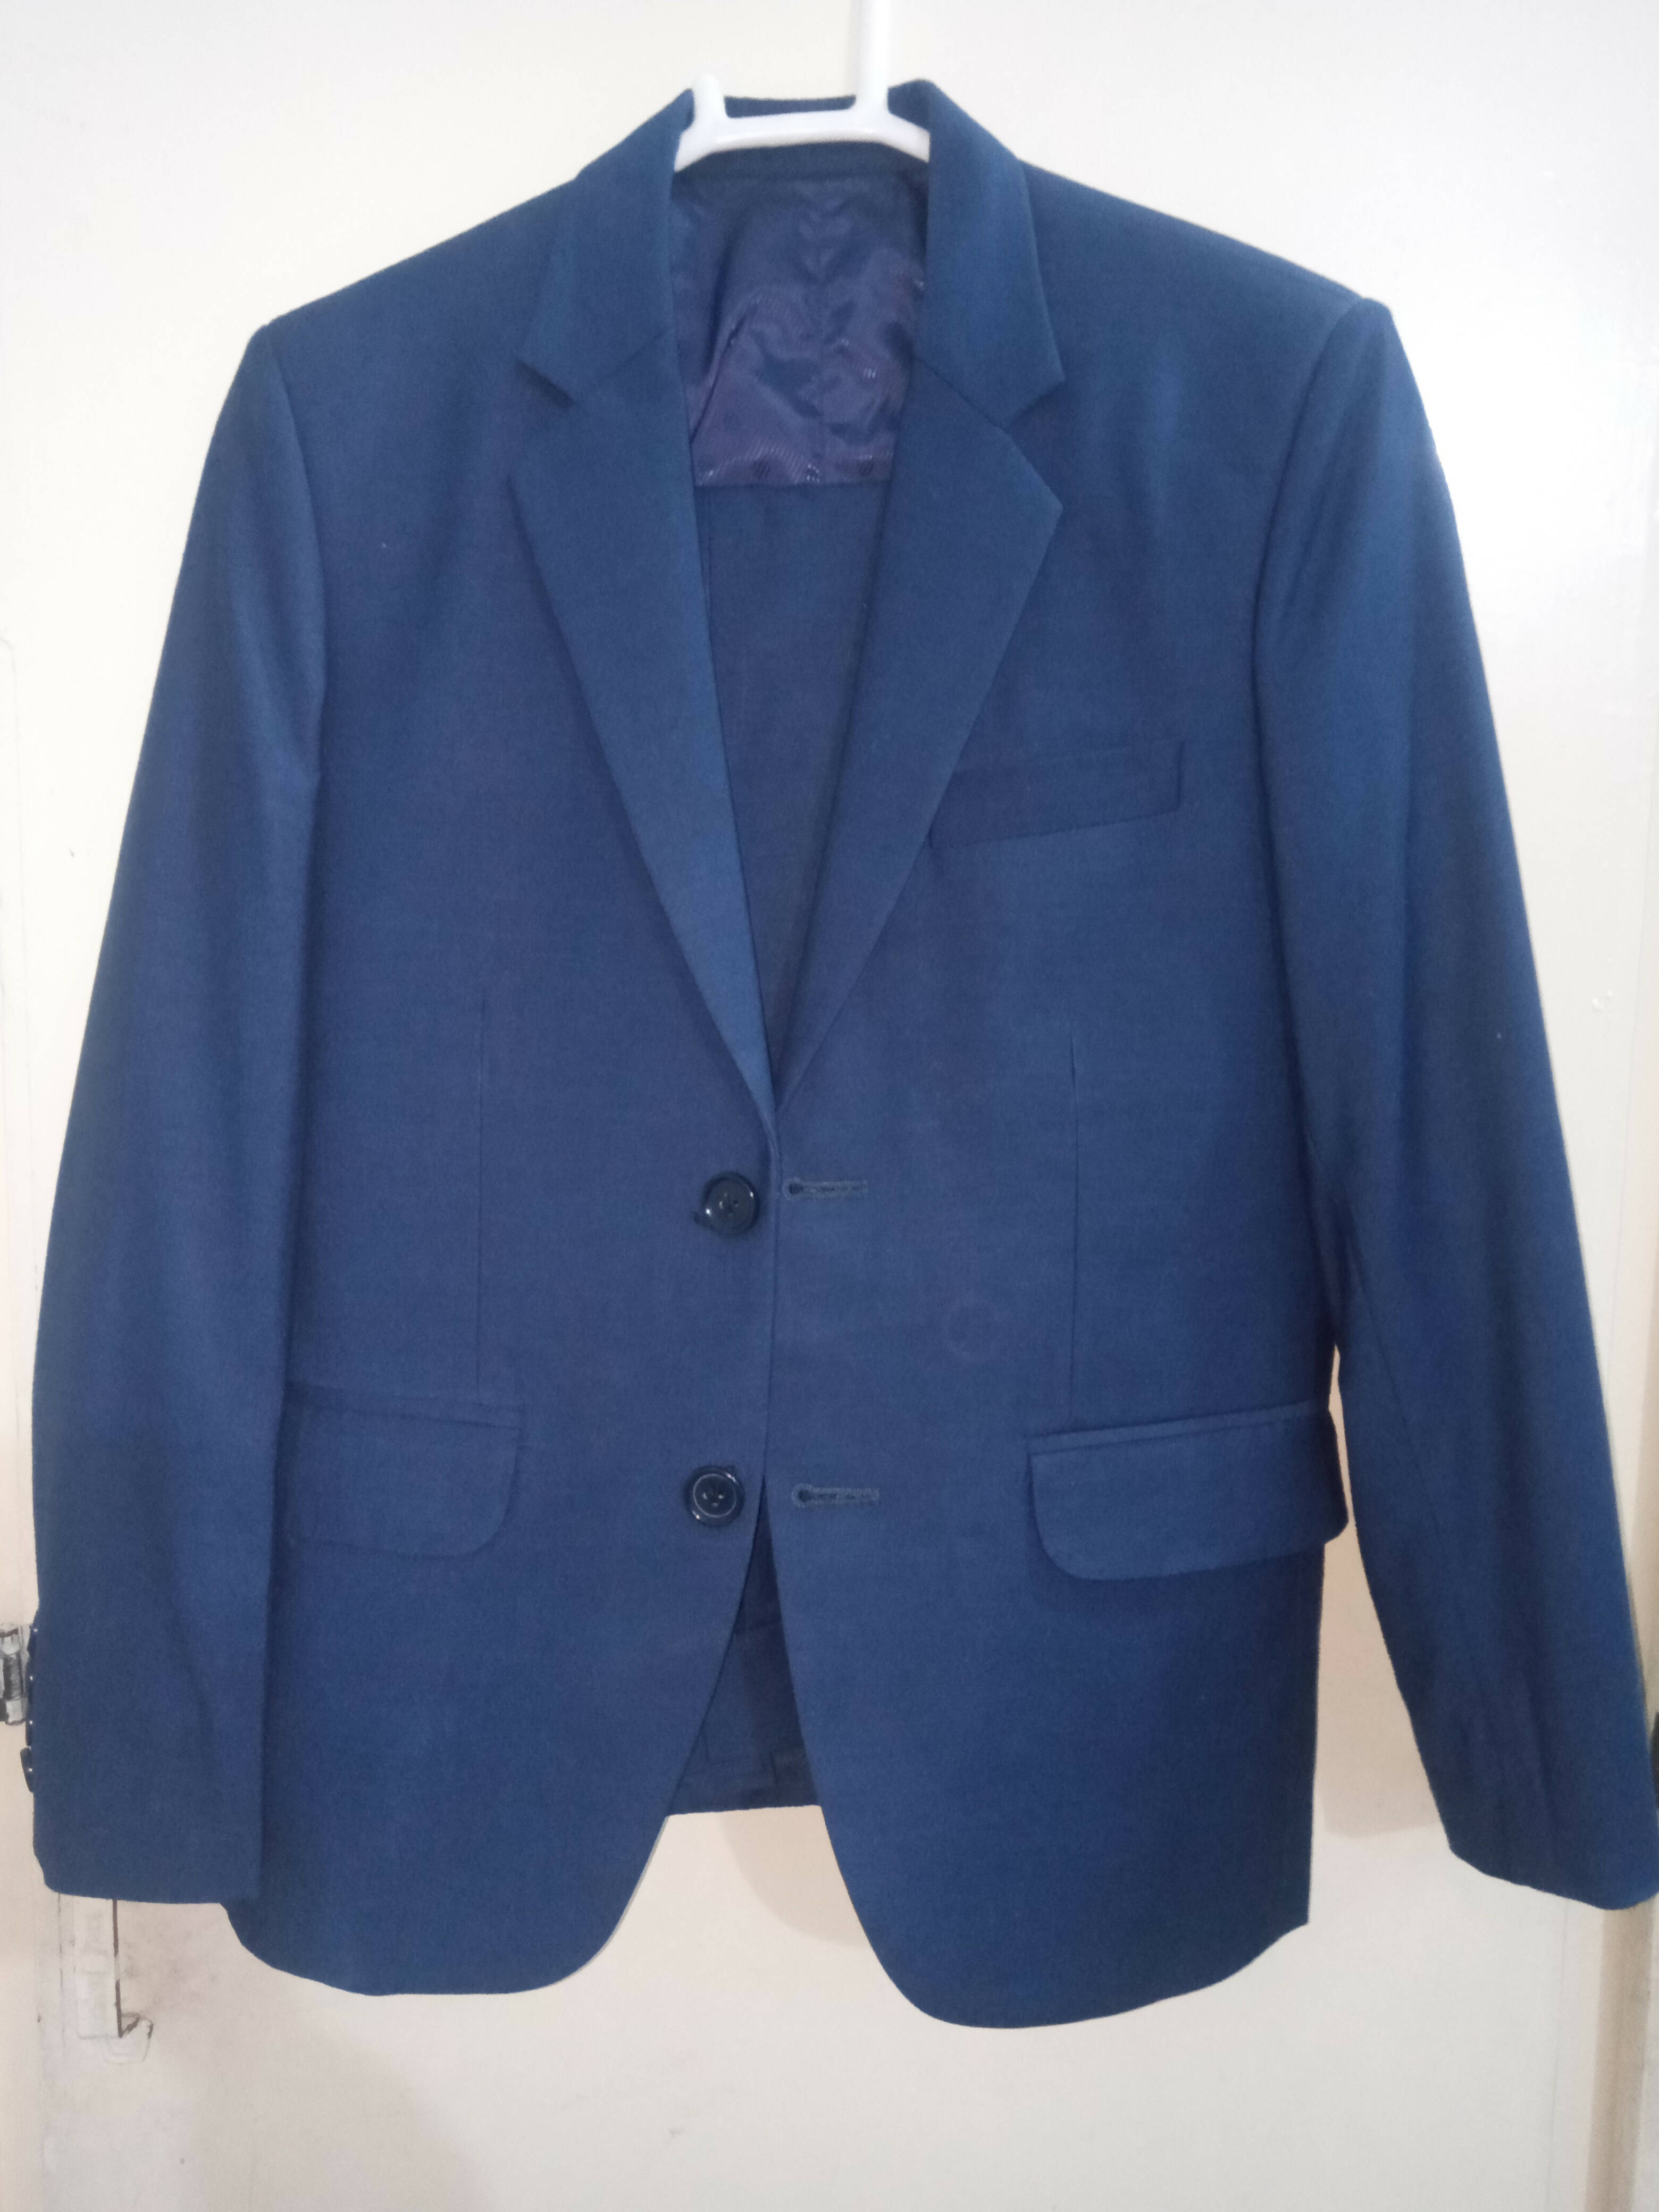 Blue formal coat with pants | Boy's Tops & Shirts | Preloved